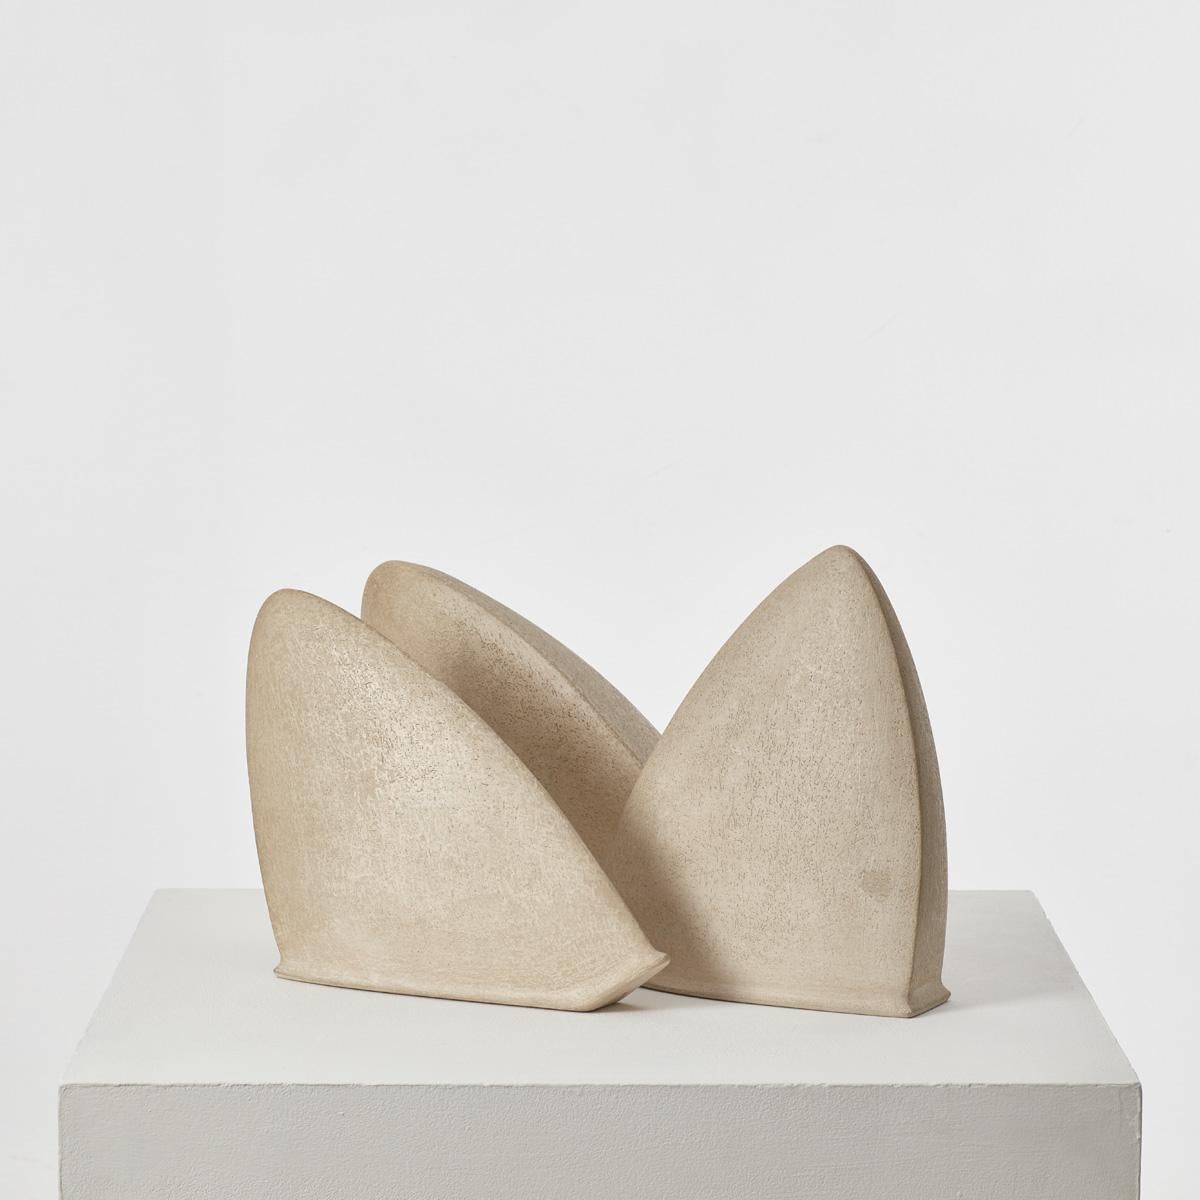 A grouping of three abstract sculptures with gently rhythmic, biomorphic forms, previously owned by Sir Terence Conran’s (1931 - 2020). Conran, an inimitable design pioneer and businessman, “did more than anyone to enhance material life in Britain